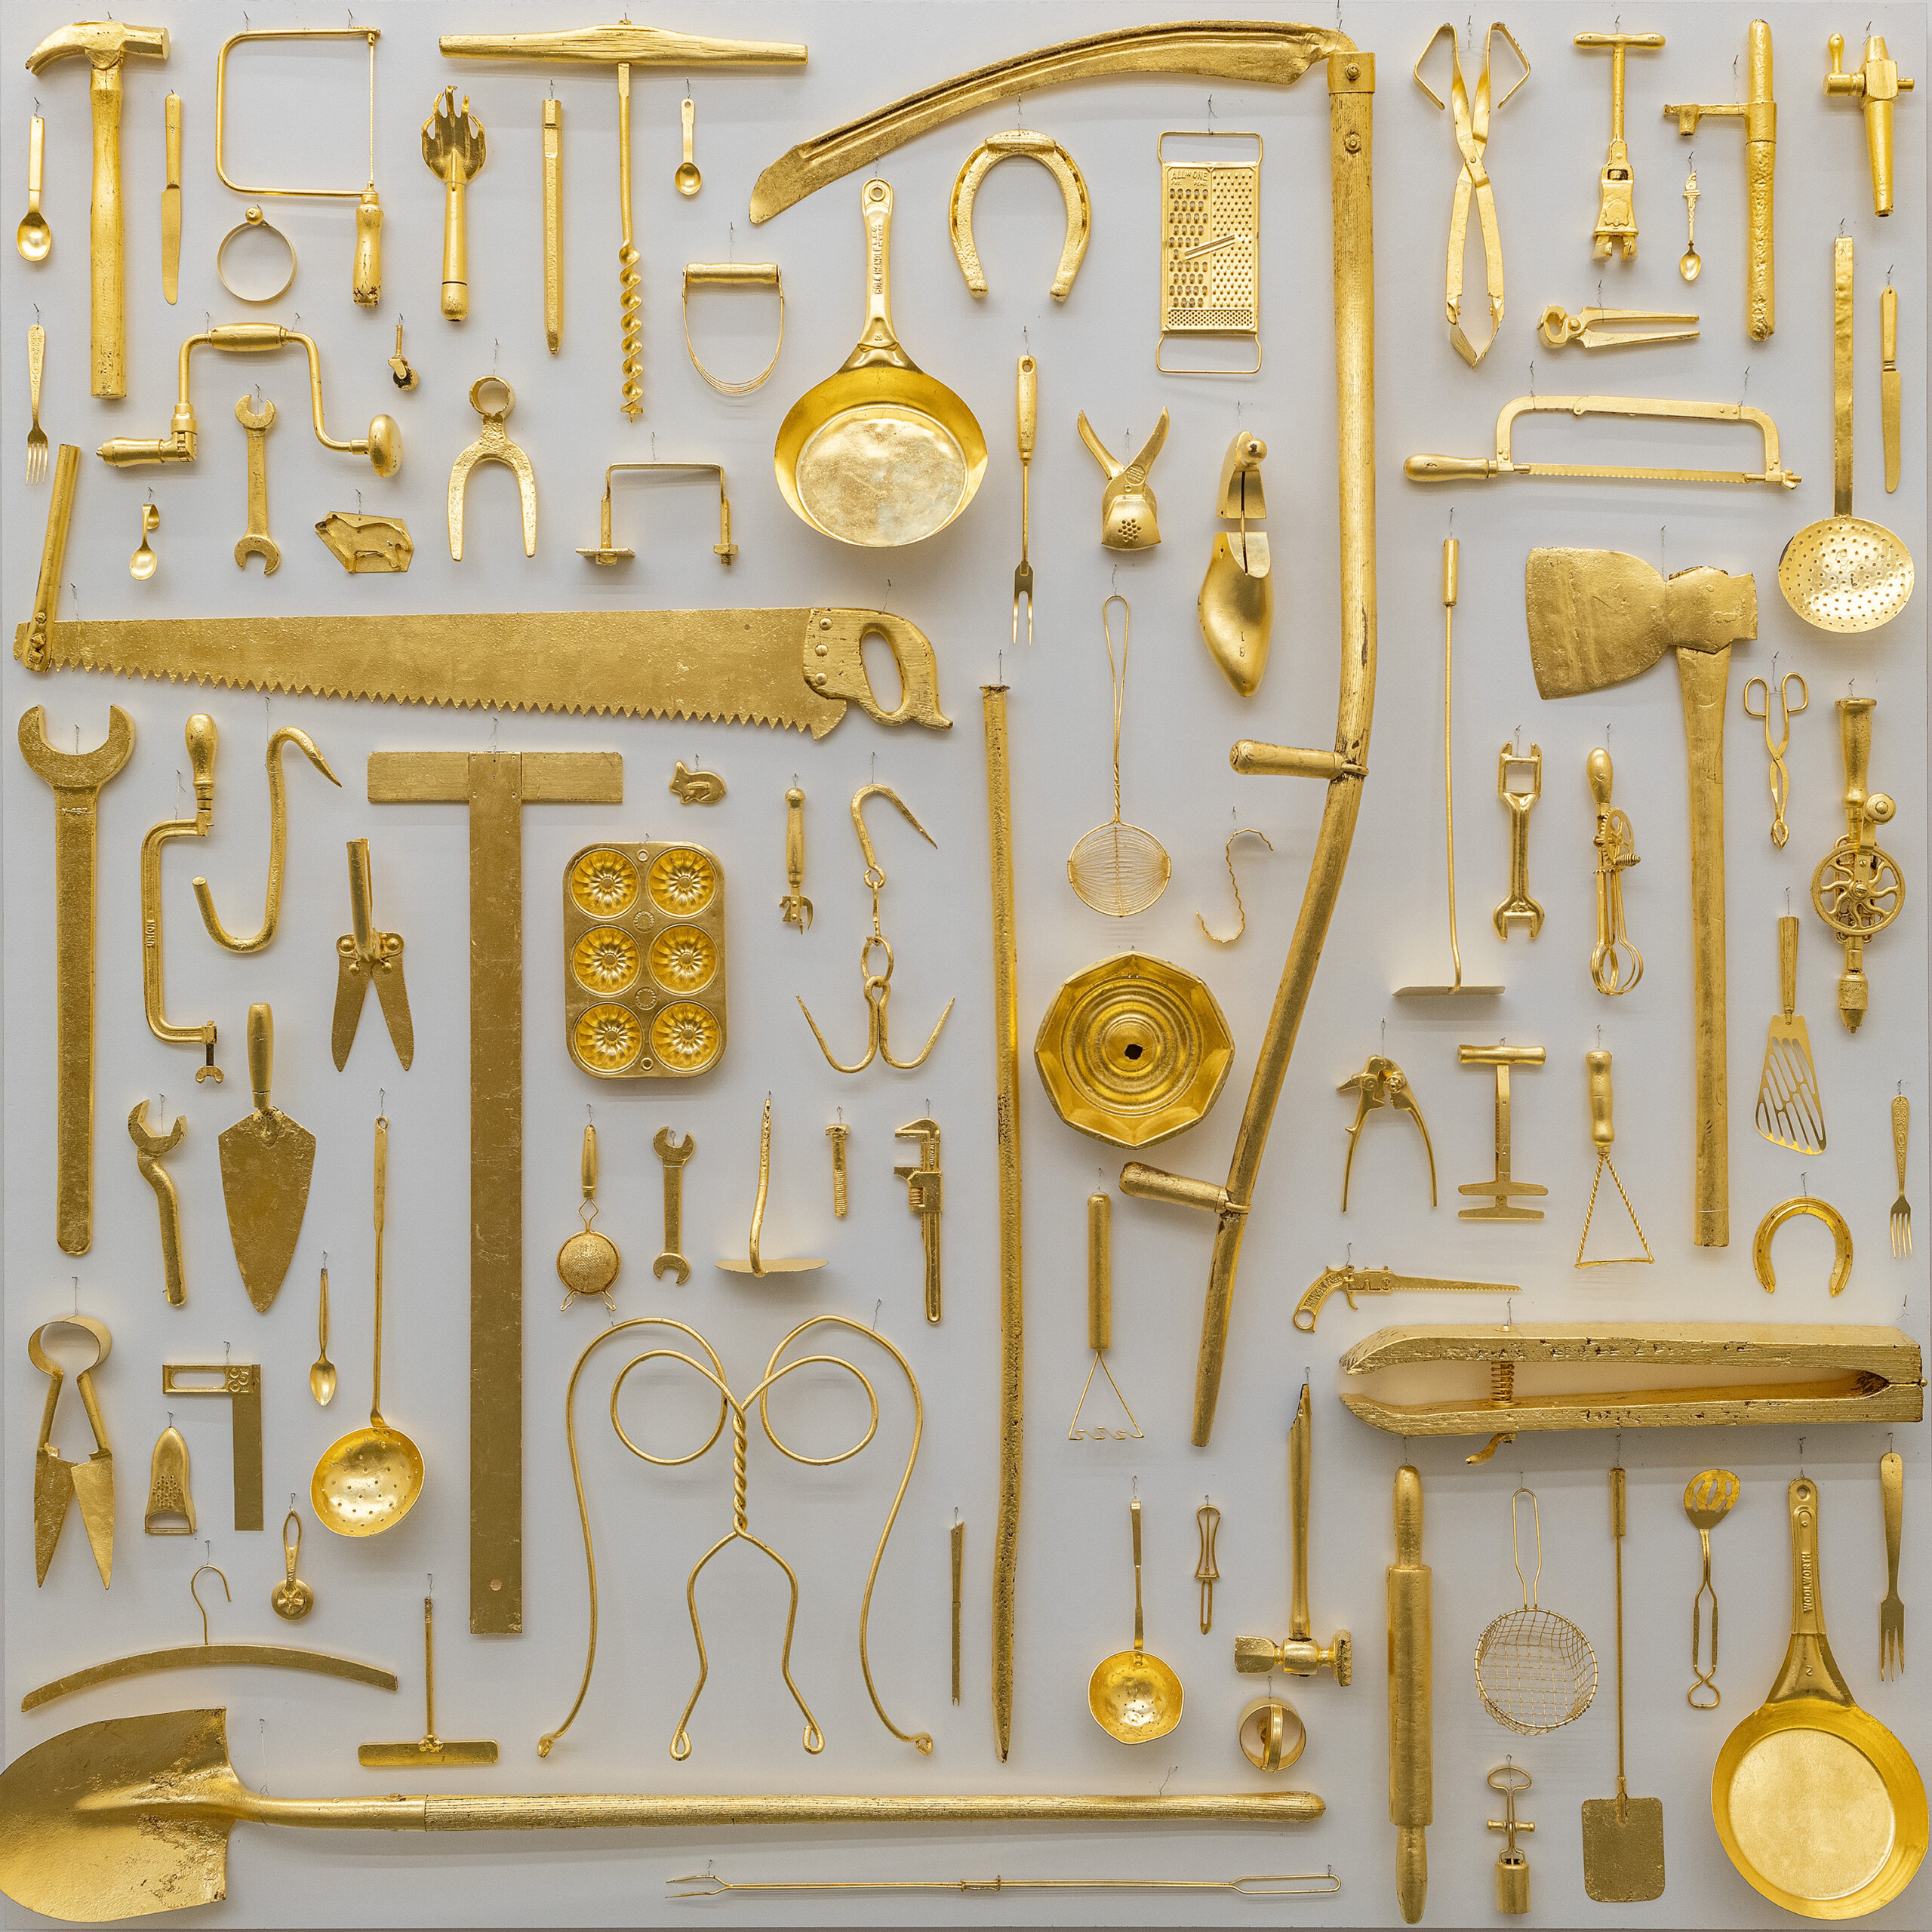 Ugo Rondinone, the alphabet of my mothers and fathers A - Z, 2022 gilded farmers tools. Courtesy of the artist and Gladstone Gallery